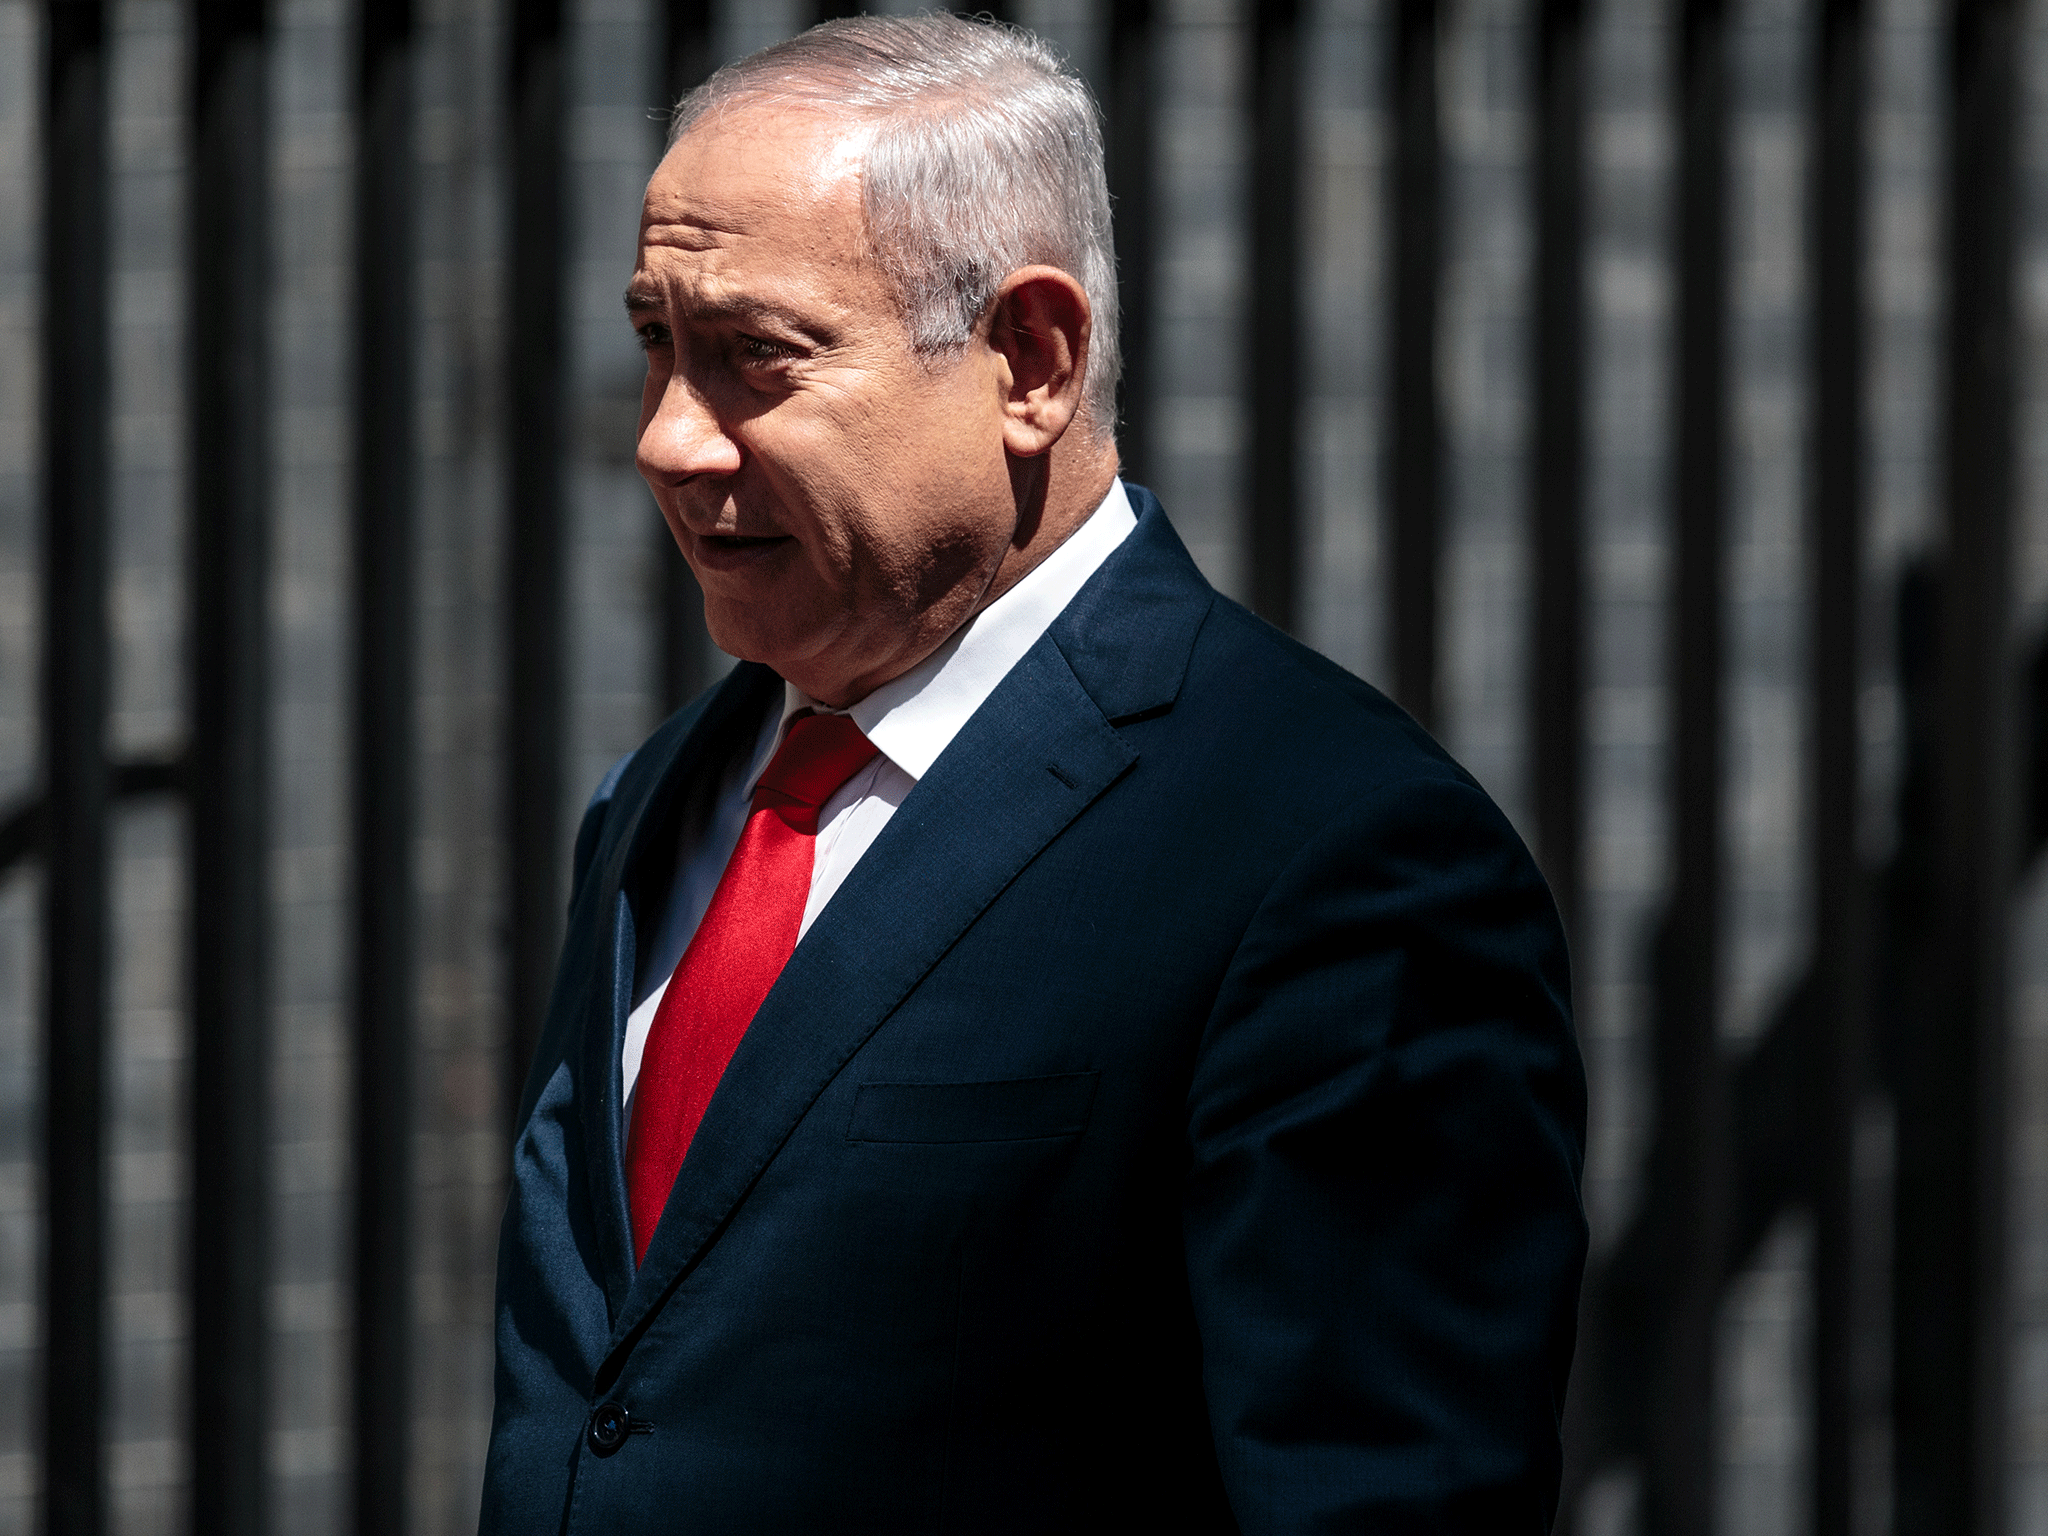 Israeli prime minister Benjamin Netanyahu arrives to meet British prime minister Theresa May on Downing Street on Wednesday